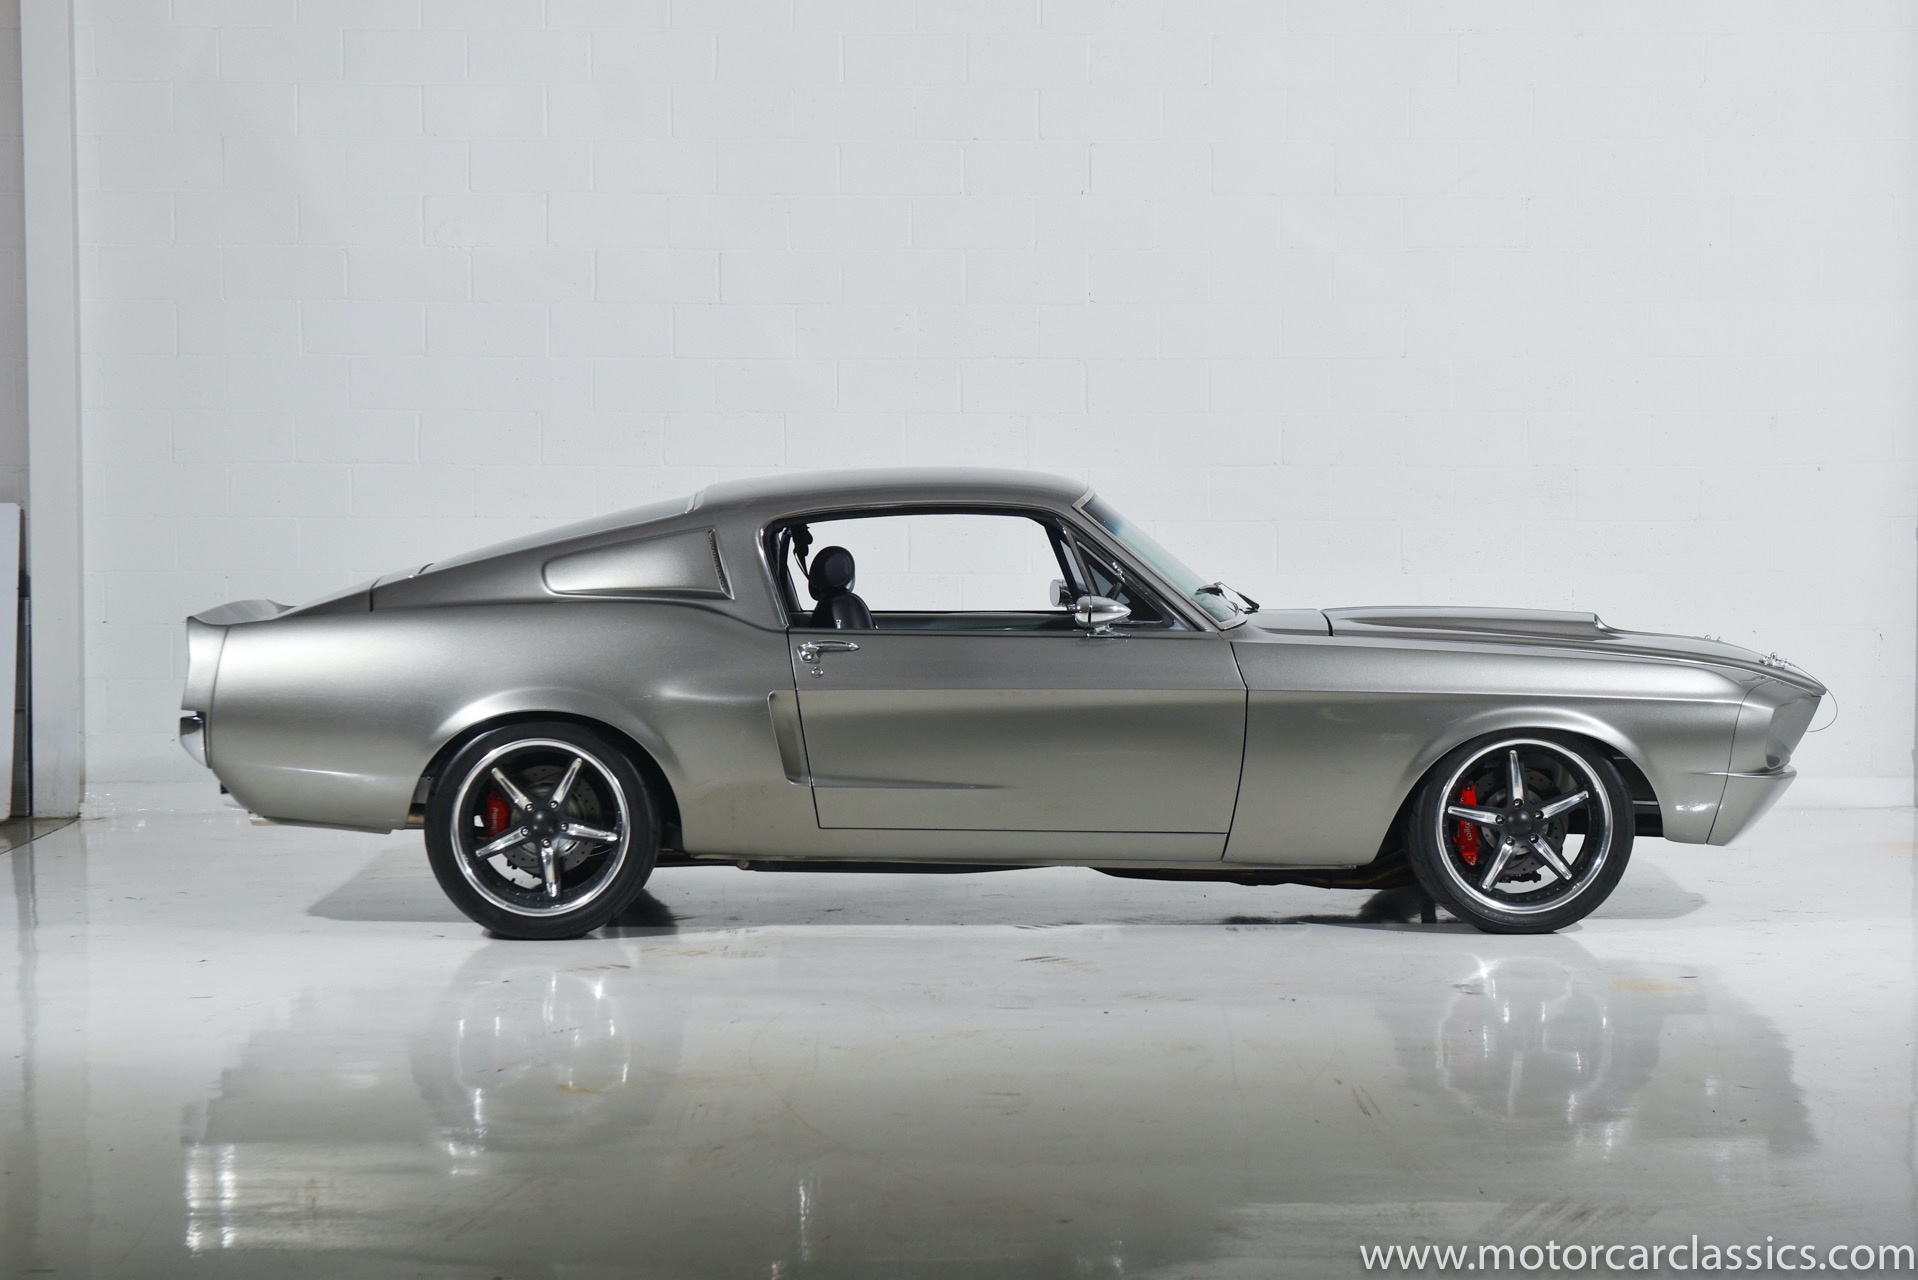 Used 1967 Ford Mustang GT500 Eleanor For Sale ($124,900) | Motorcar ... 1967 Ford Mustang Eleanor